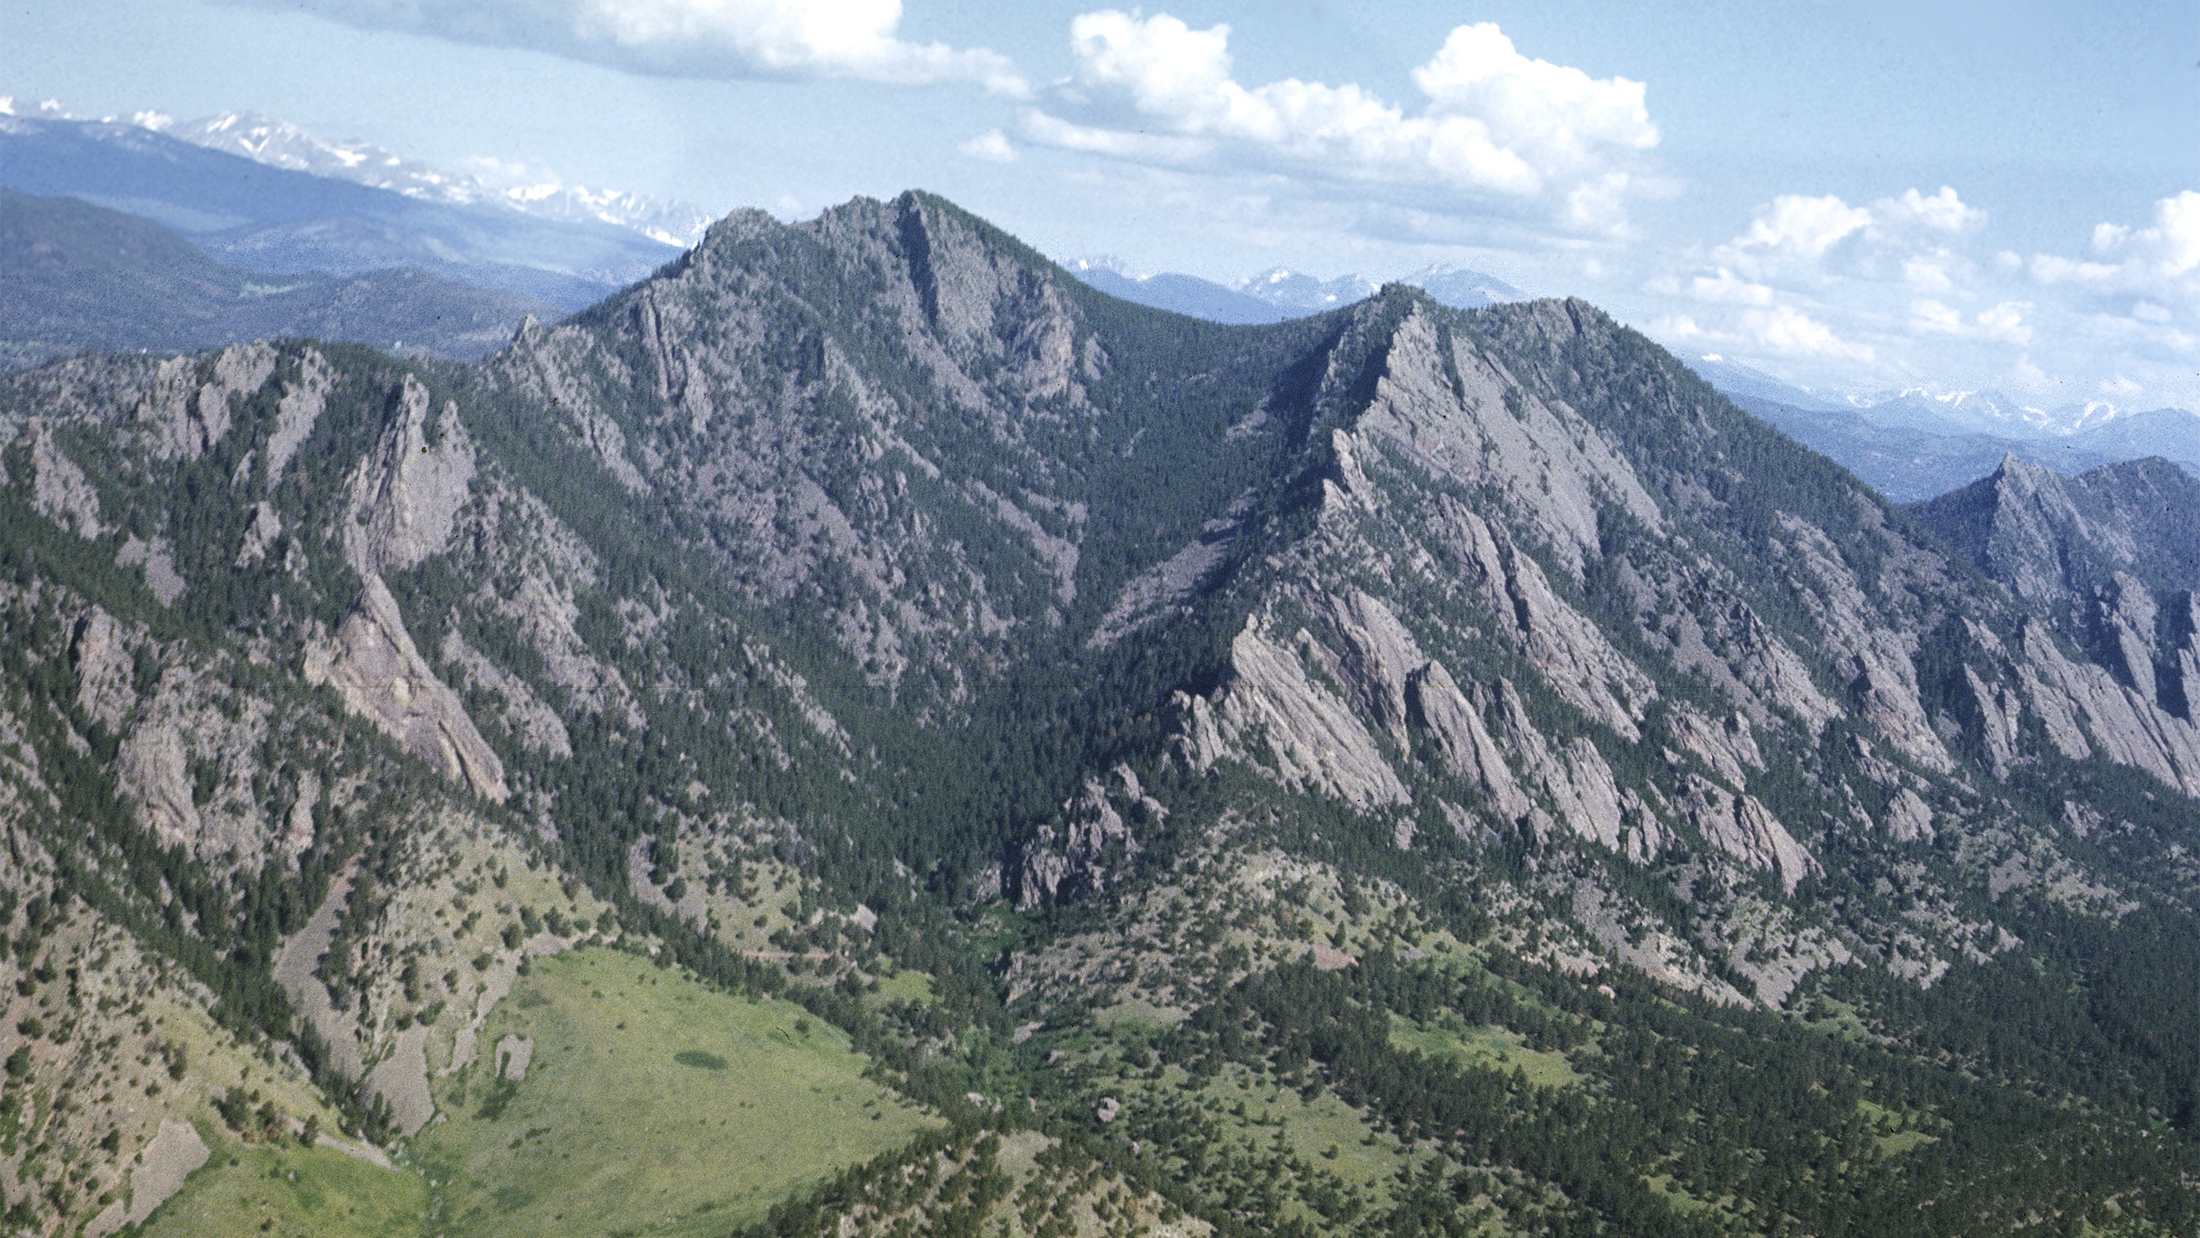 The Boulder Flatirons and the mountain backdrop as seen from an airplane.